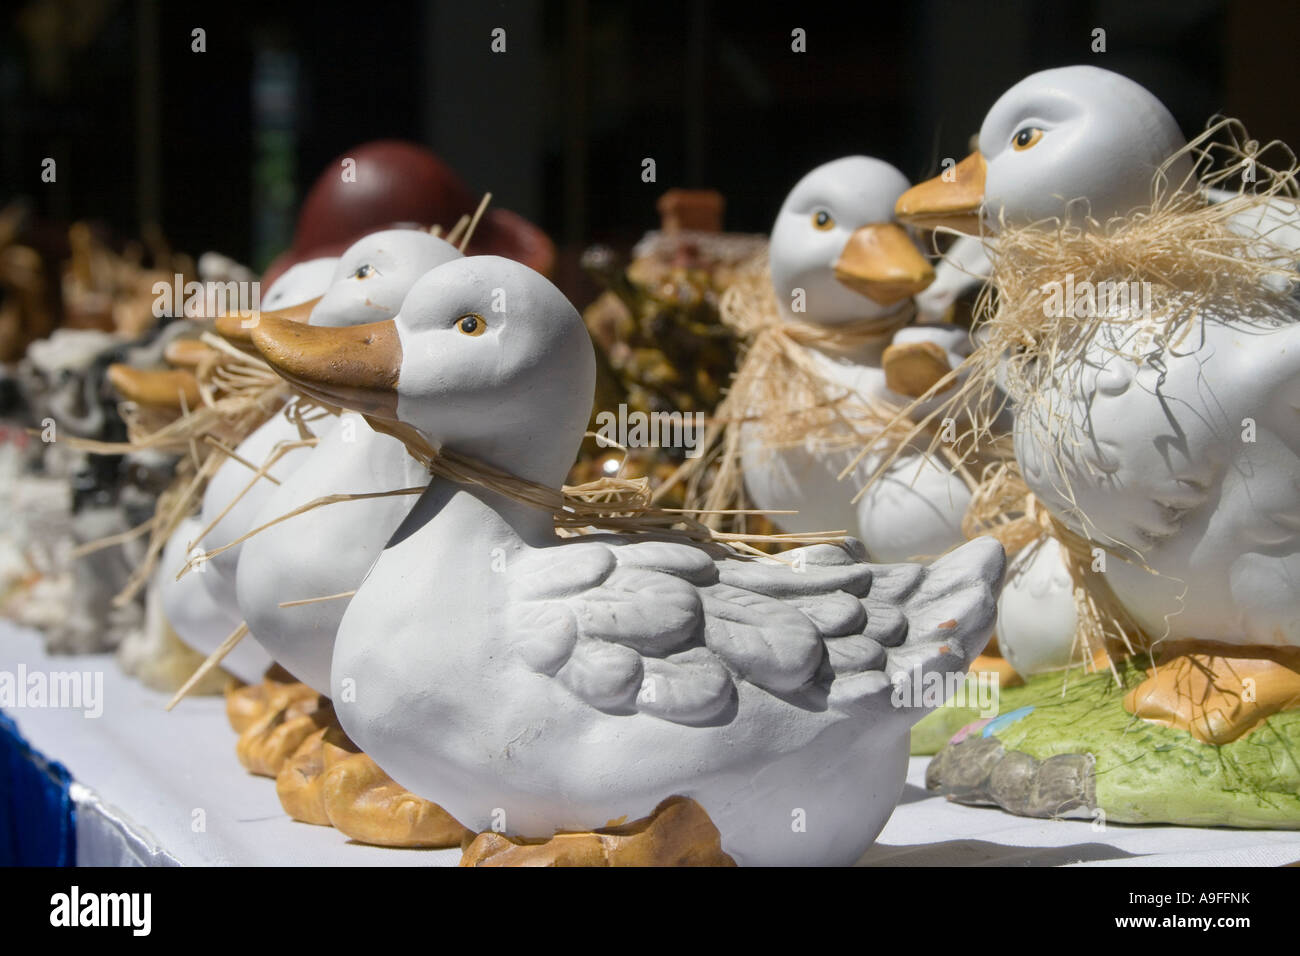 Carved ducks on sale at The Curve shopping centre Damansara Selangor Stock Photo